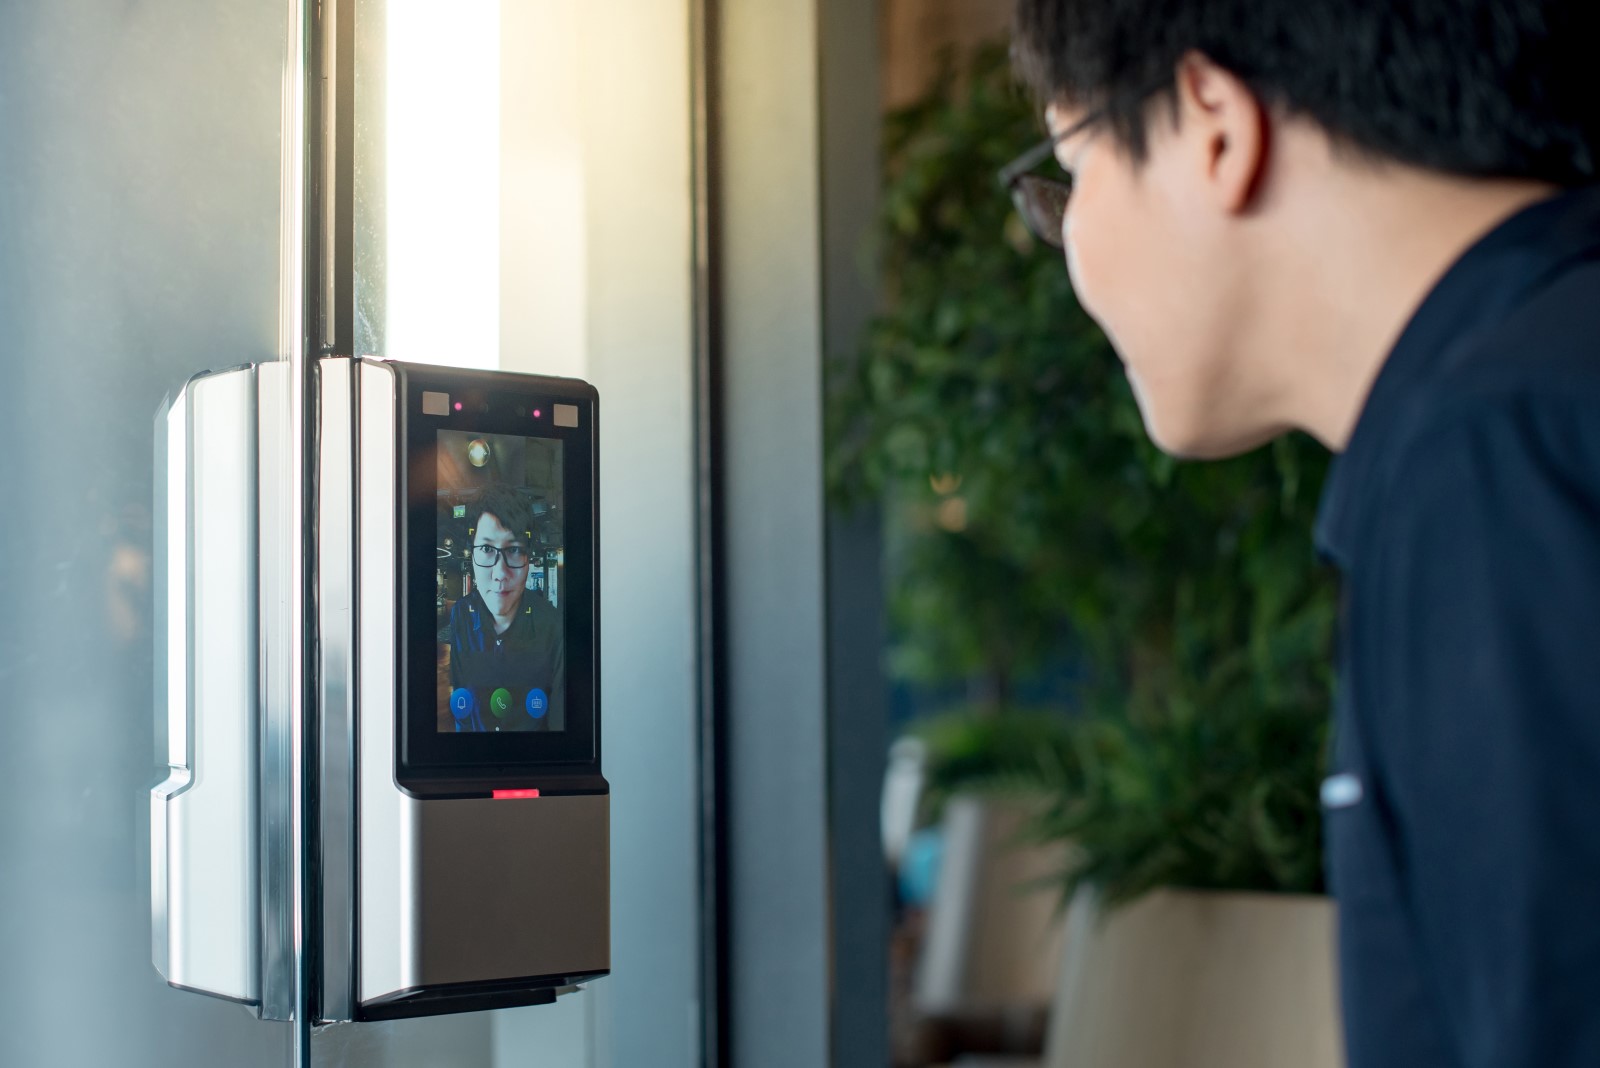 As part of a company’s biometric access control system, a biometric control device scans an employee’s face for recognition before allowing him entry.